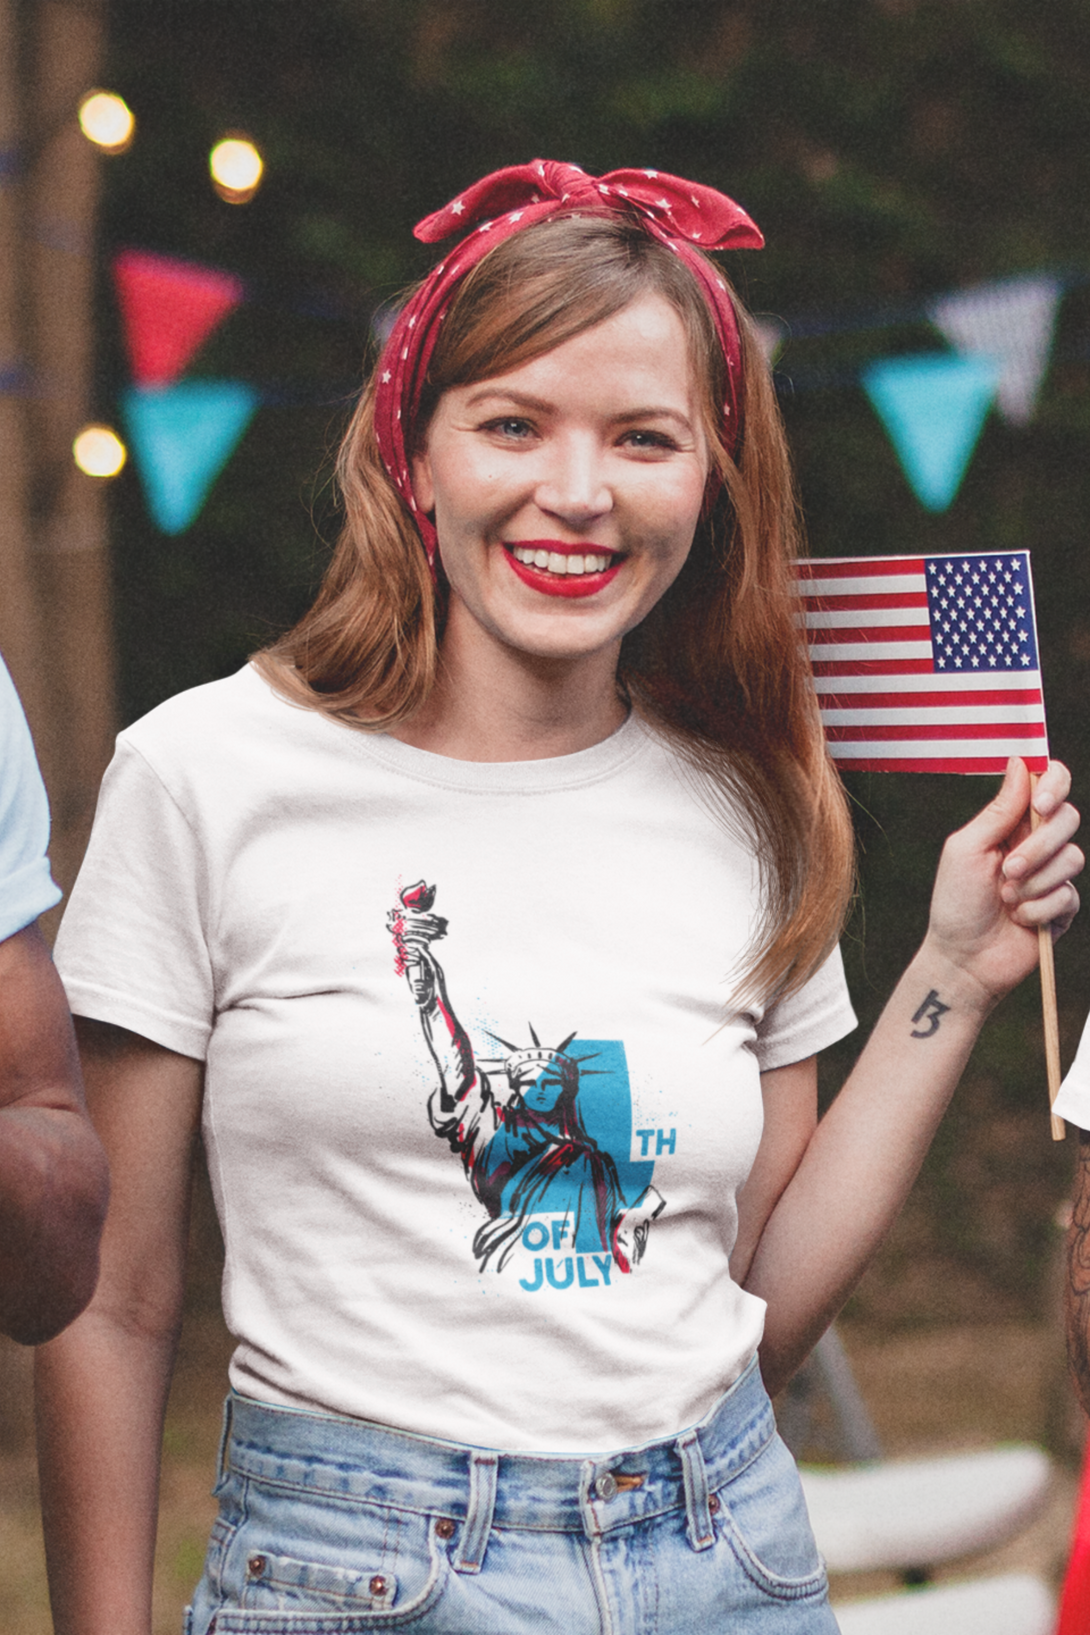 Statue Of Liberty Vintage Printed T-Shirt For Women - WowWaves